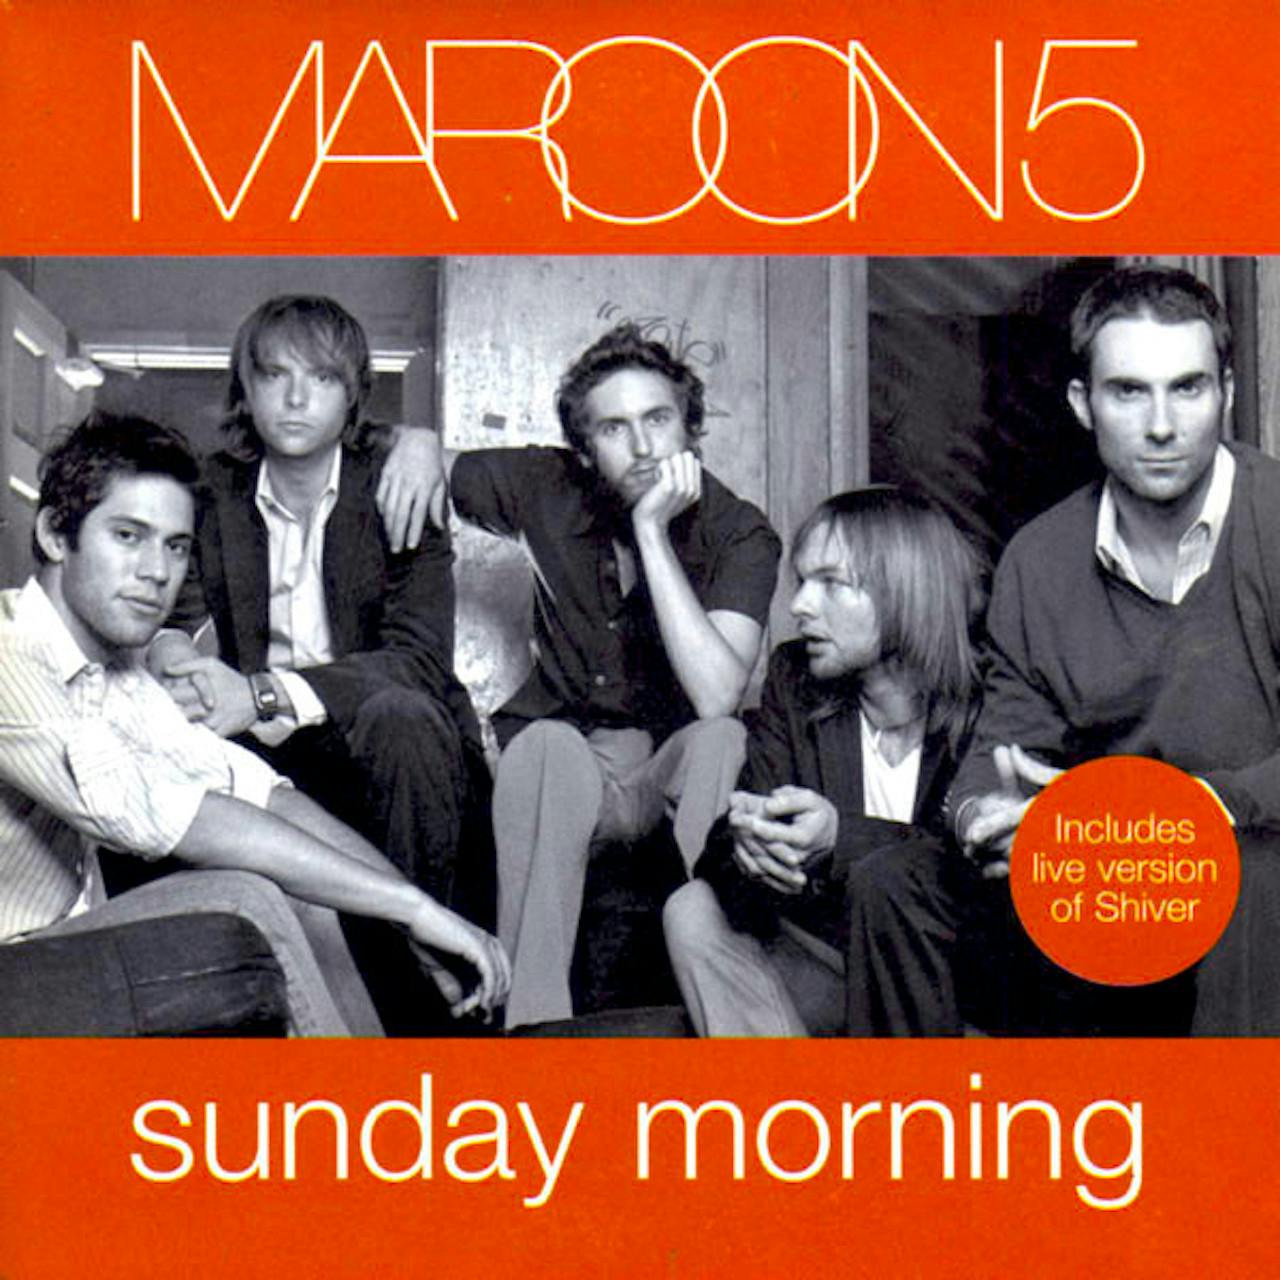 Sunday Morning by Maroon 5 album cover